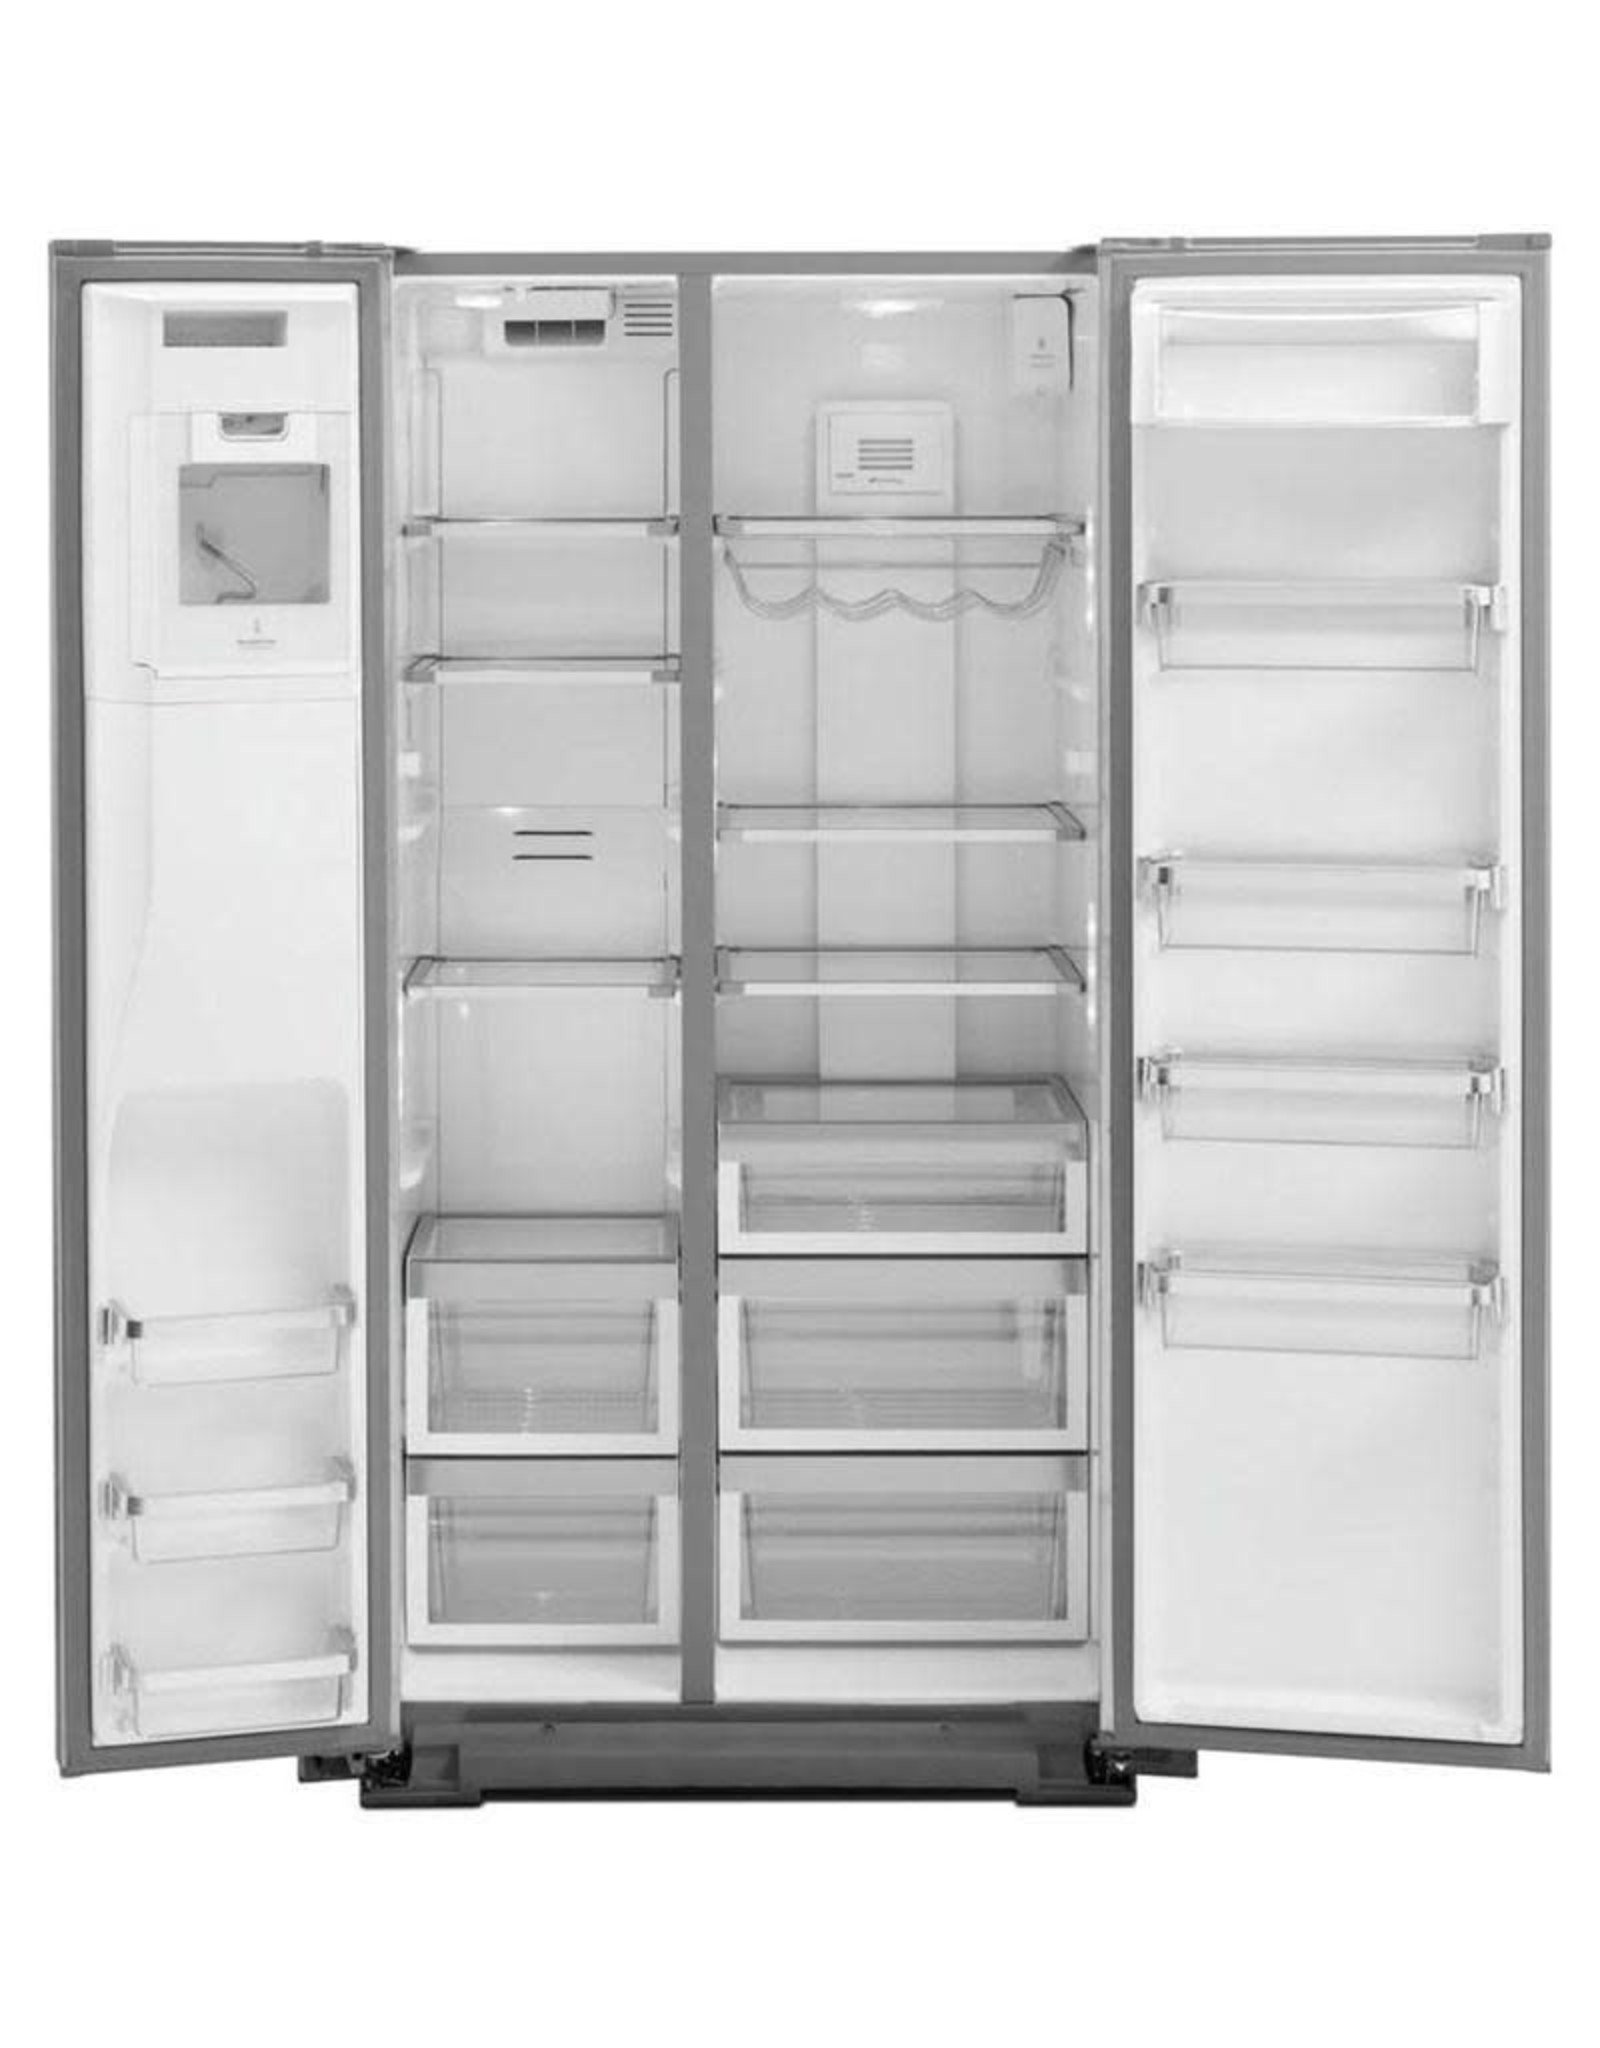 KRSC703HPS 36 in. W 22.6 cu. ft. Side by Side Refrigerator in Stainless Steel with PrintShield Finish, Counter Depth